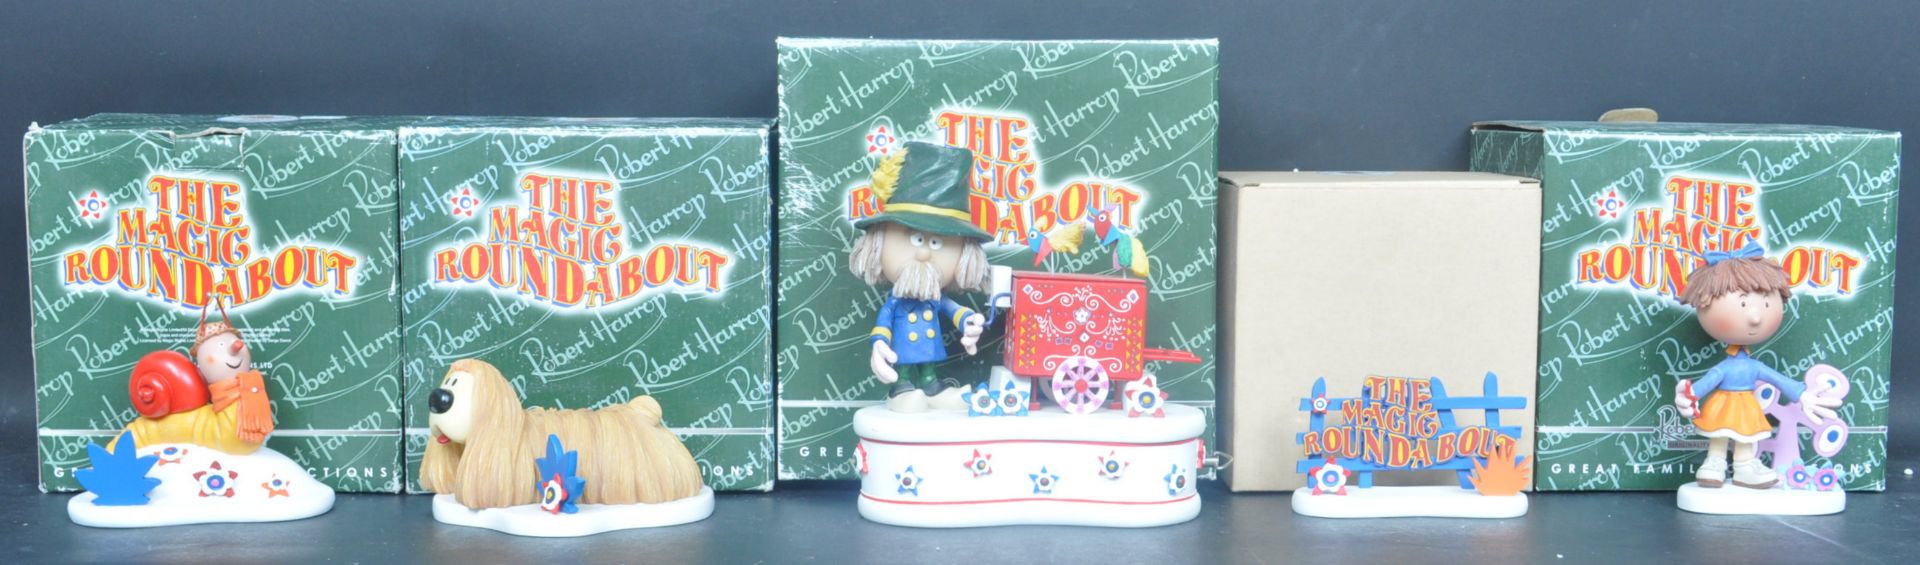 ROBERT HARROP - MAGIC ROUNDABOUT - COLLECTION OF FIVE FIGURINES